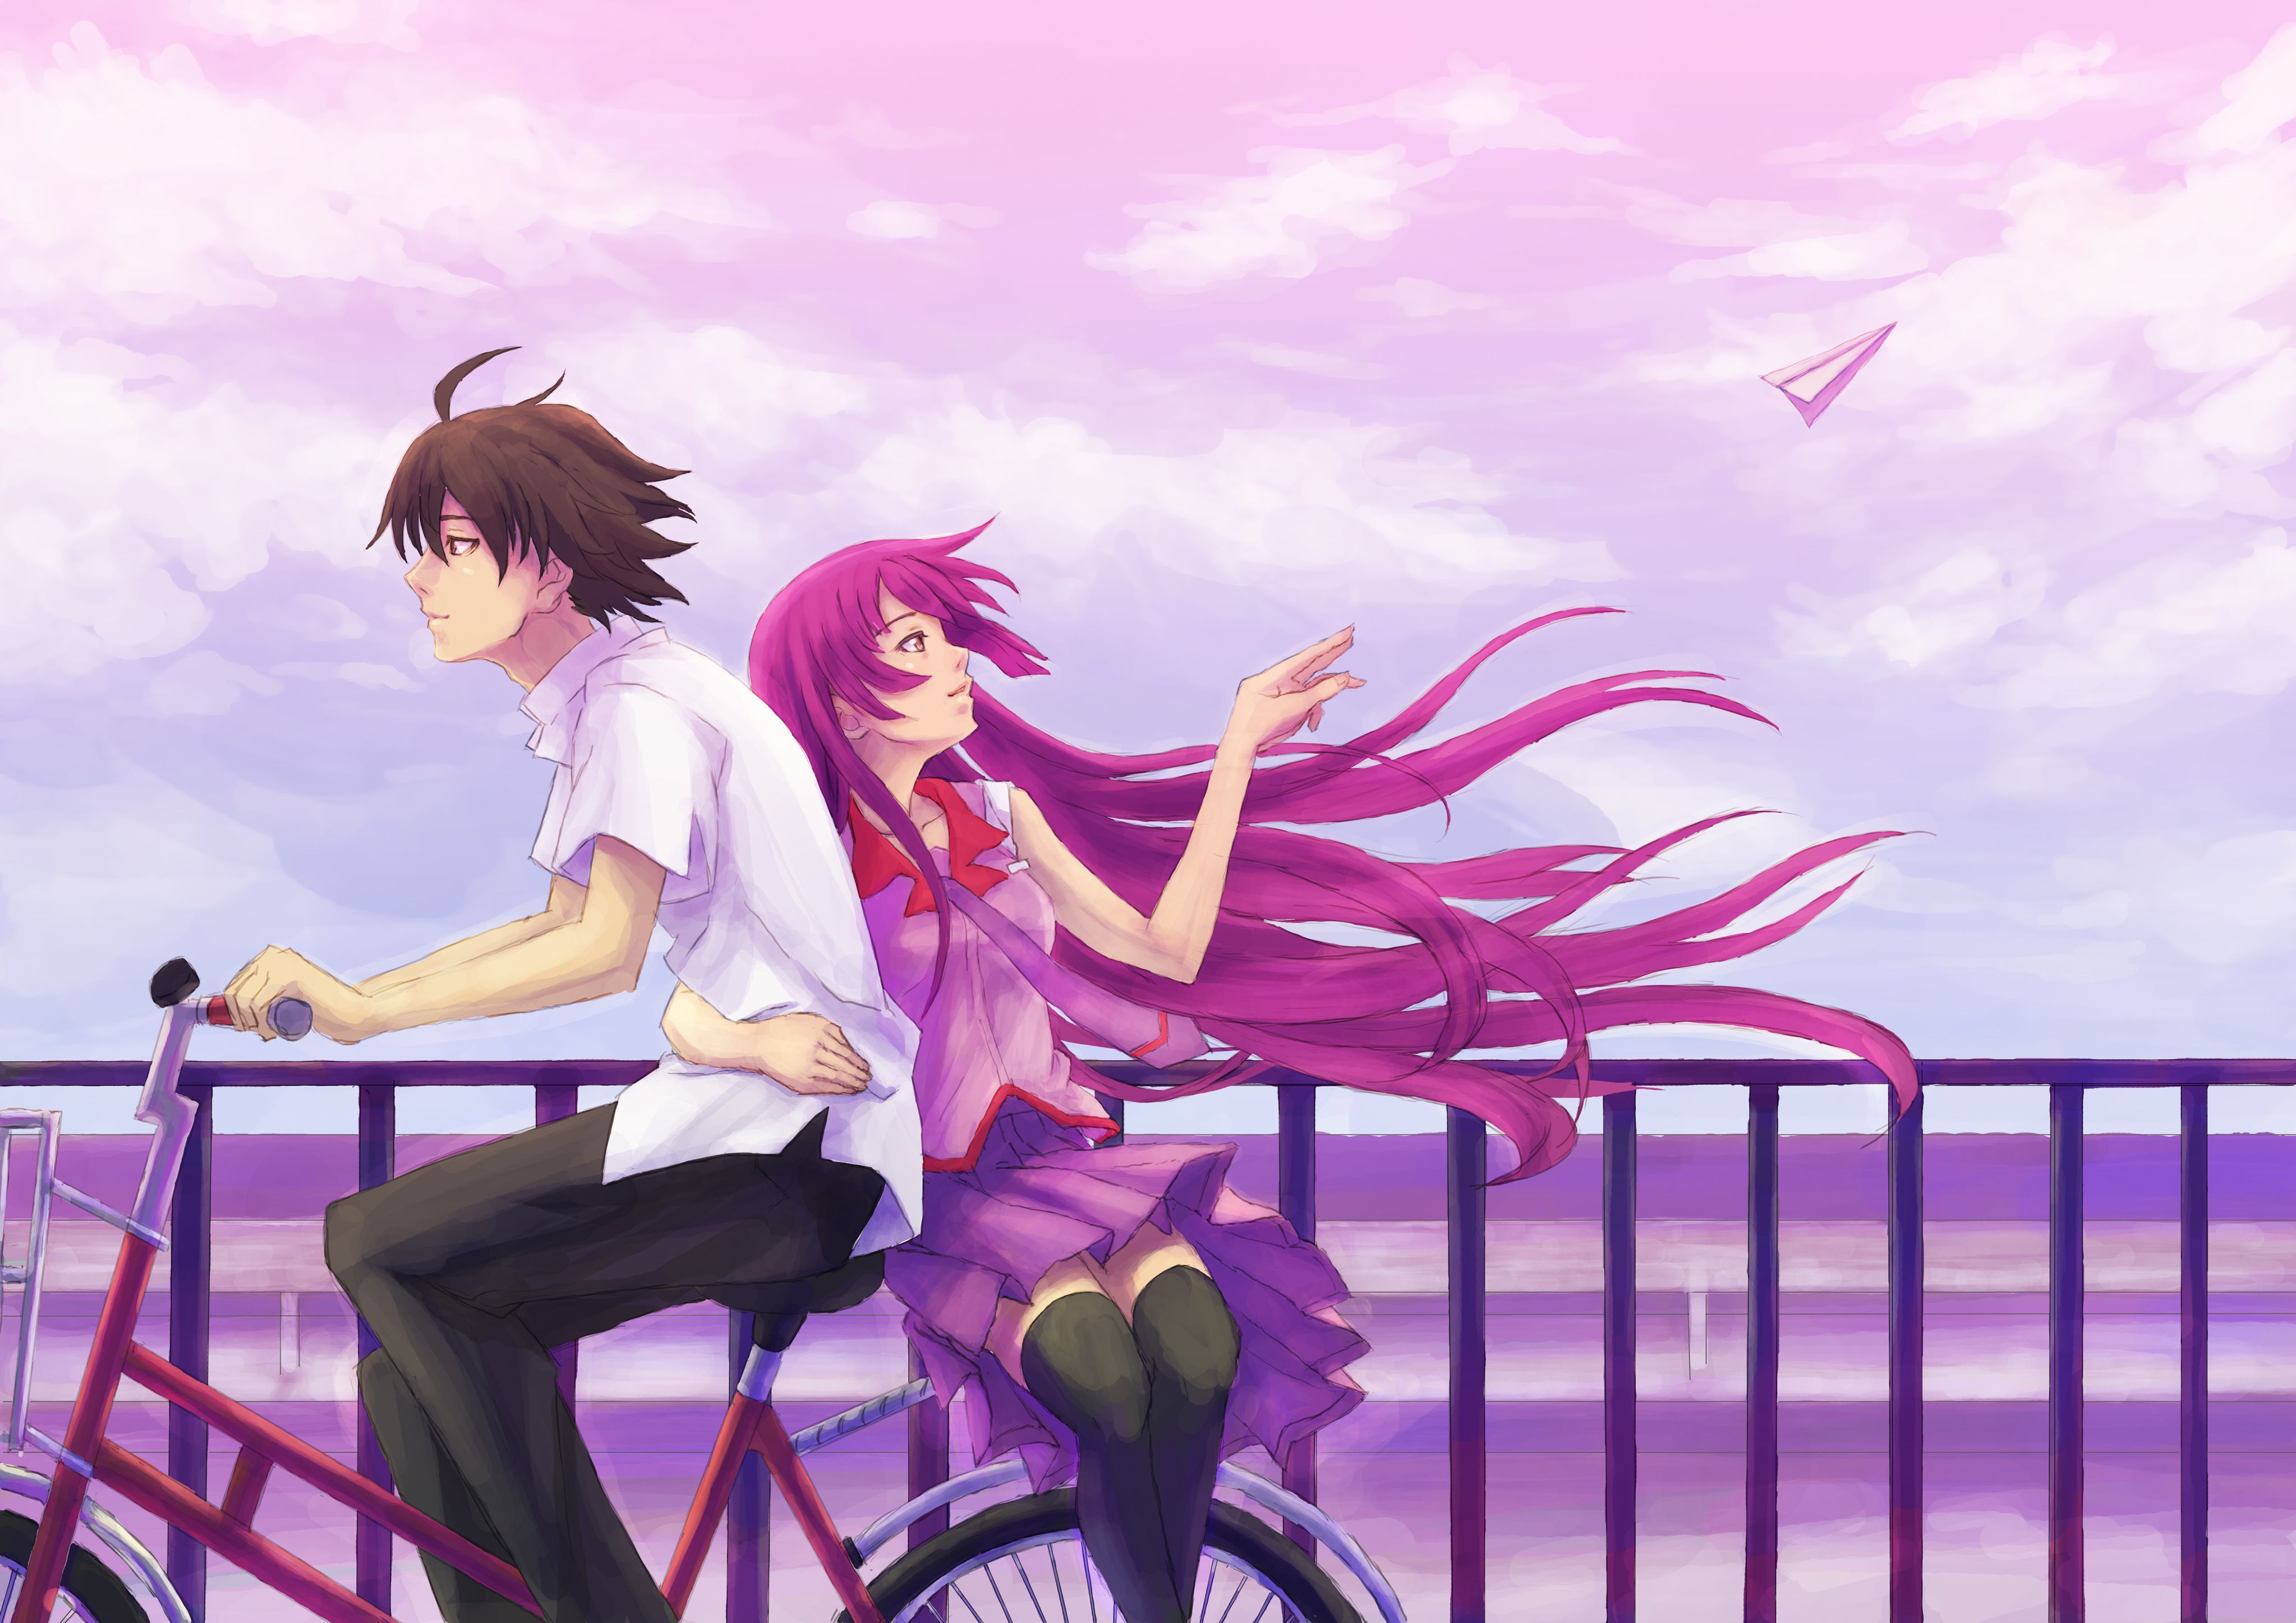 Unique Anime Boy and Girl Wallpapers Hd